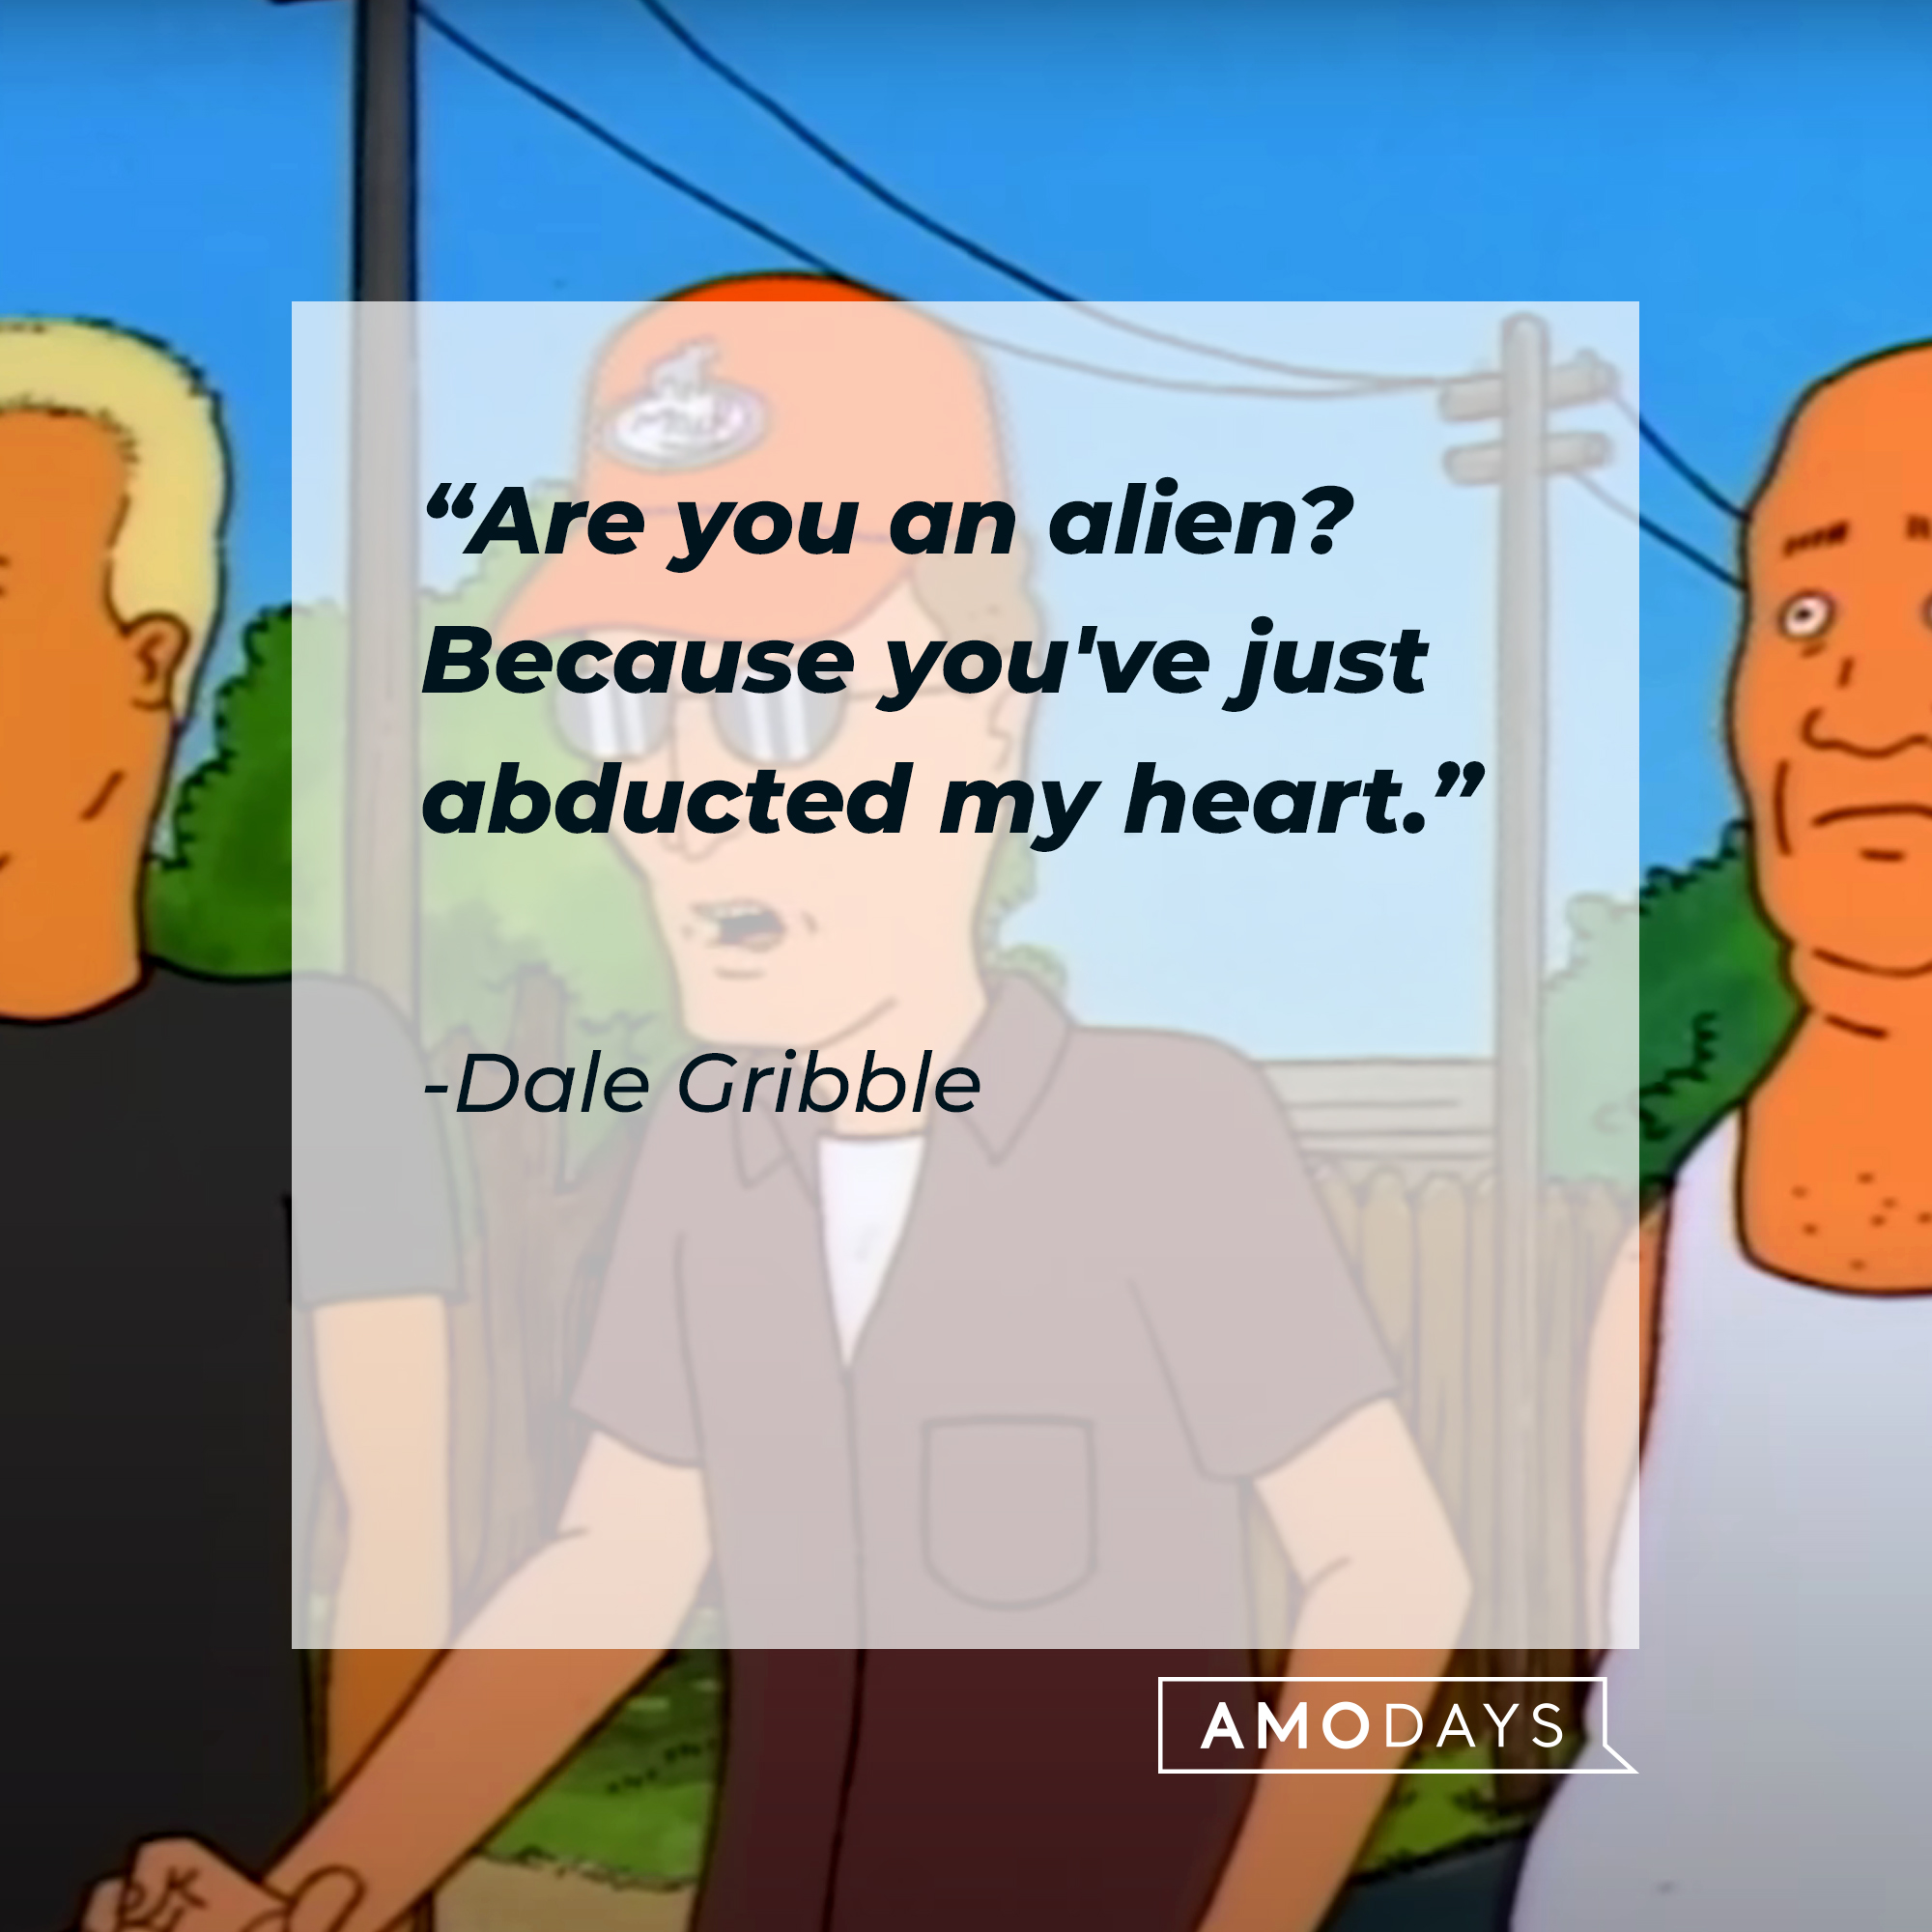 Dale Gribble and other characters from "King of the Hill," with his quote: "Are you an alien? Because you've just abducted my heart.” | Source: Youtube.com/adultswim